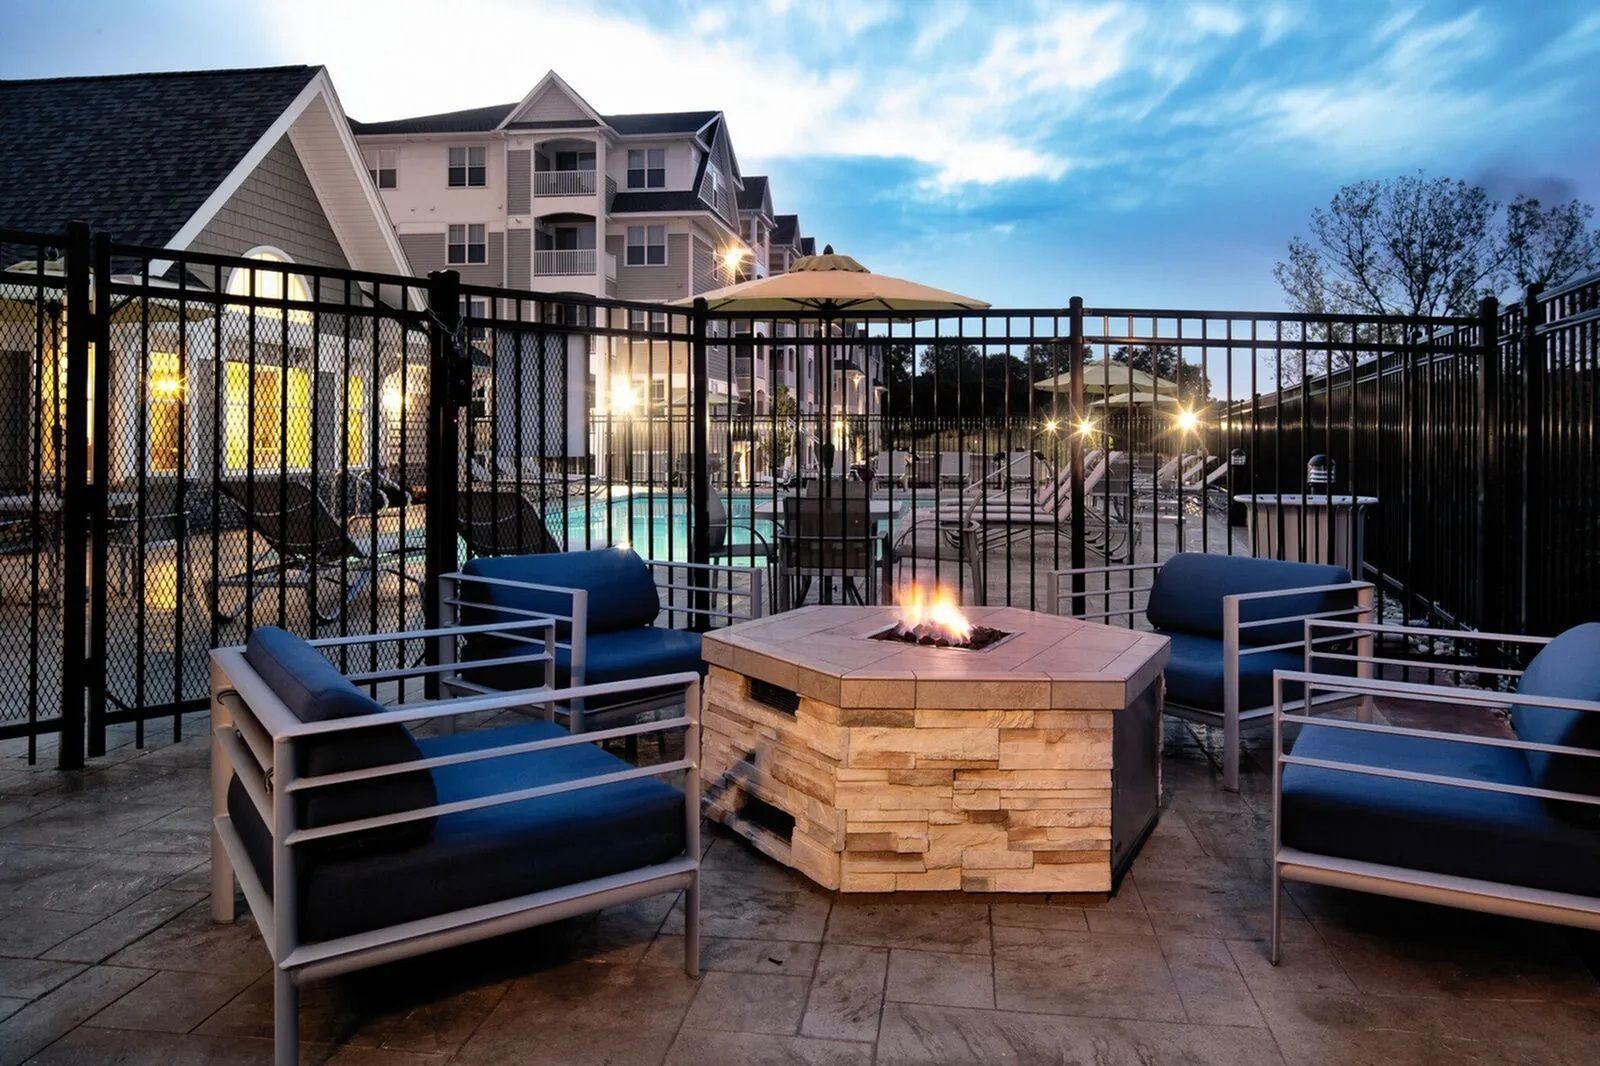 Outdoor fire pit at The Residences At Great Pond.